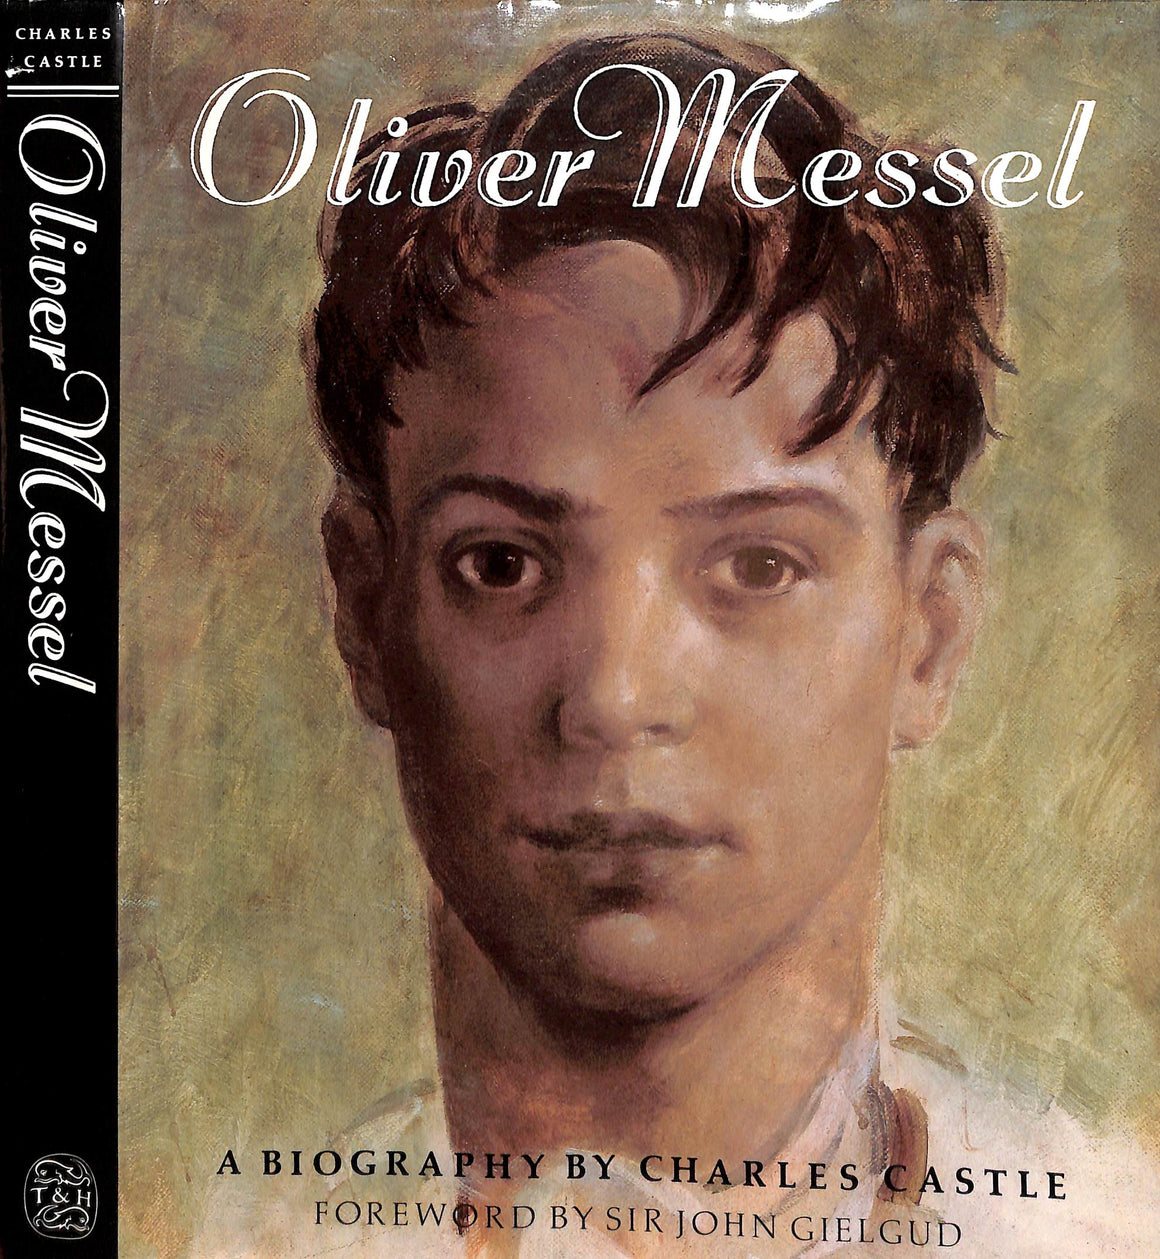 "Oliver Messel: A Biography" 1986 CASTLE, Charles